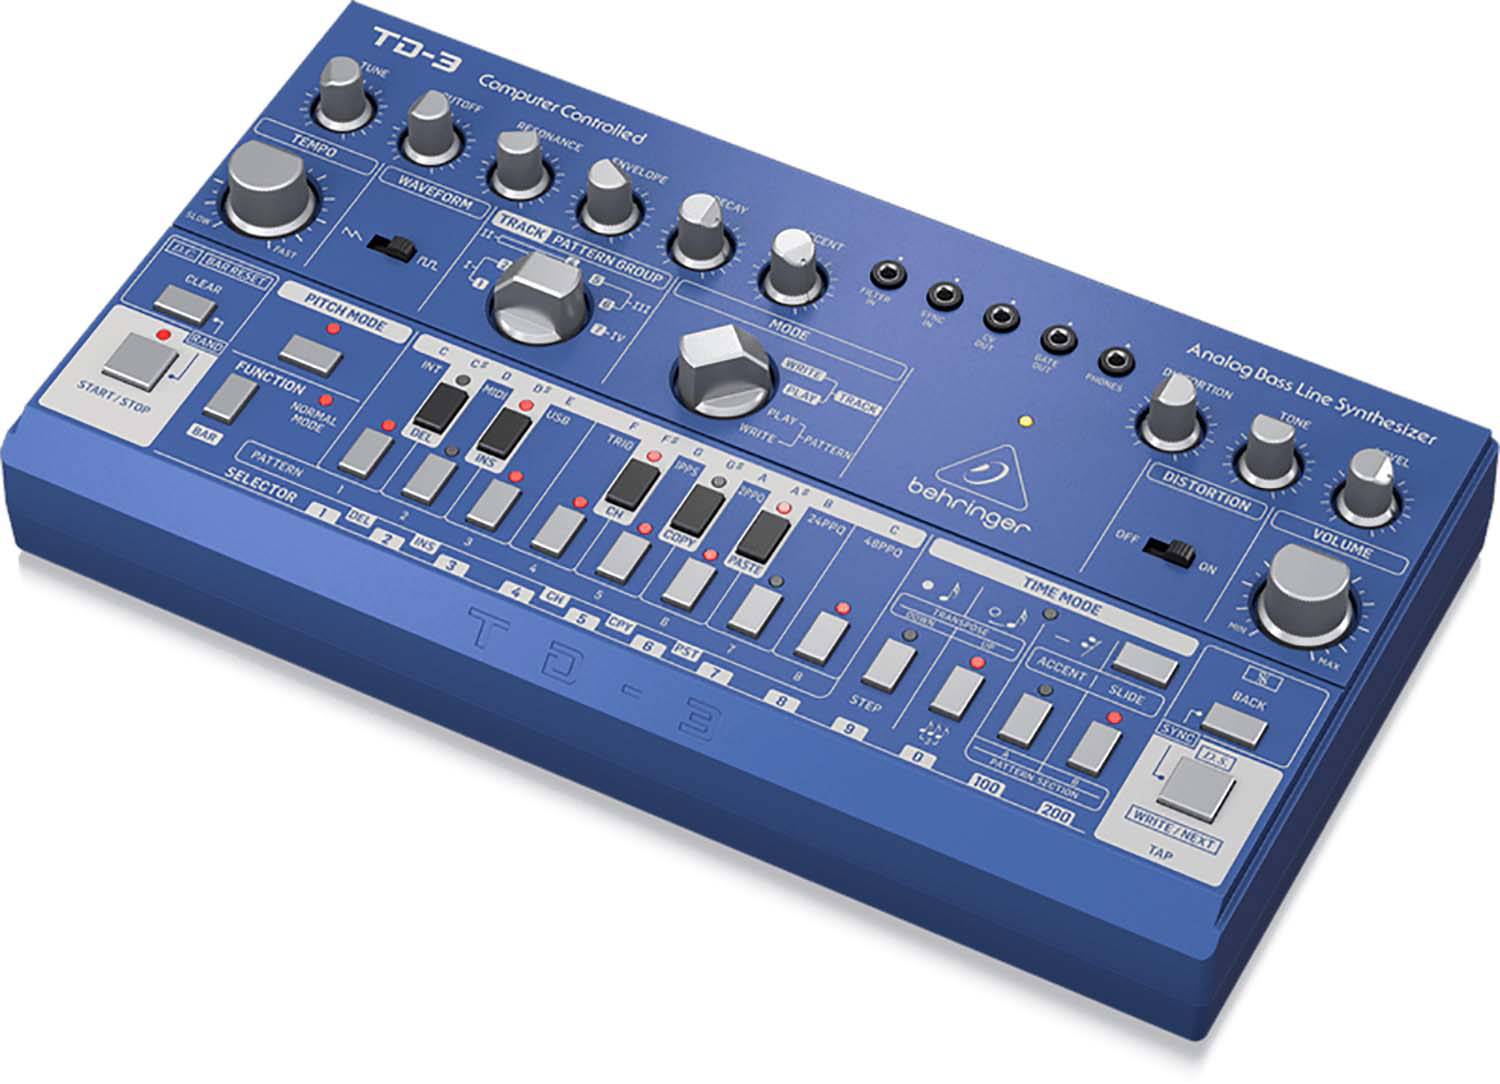 Behringer TD-3-BU Analog Bass Line Synthesizer With VCO, VCF And 16-Step Sequencer - Blue - Hollywood DJ